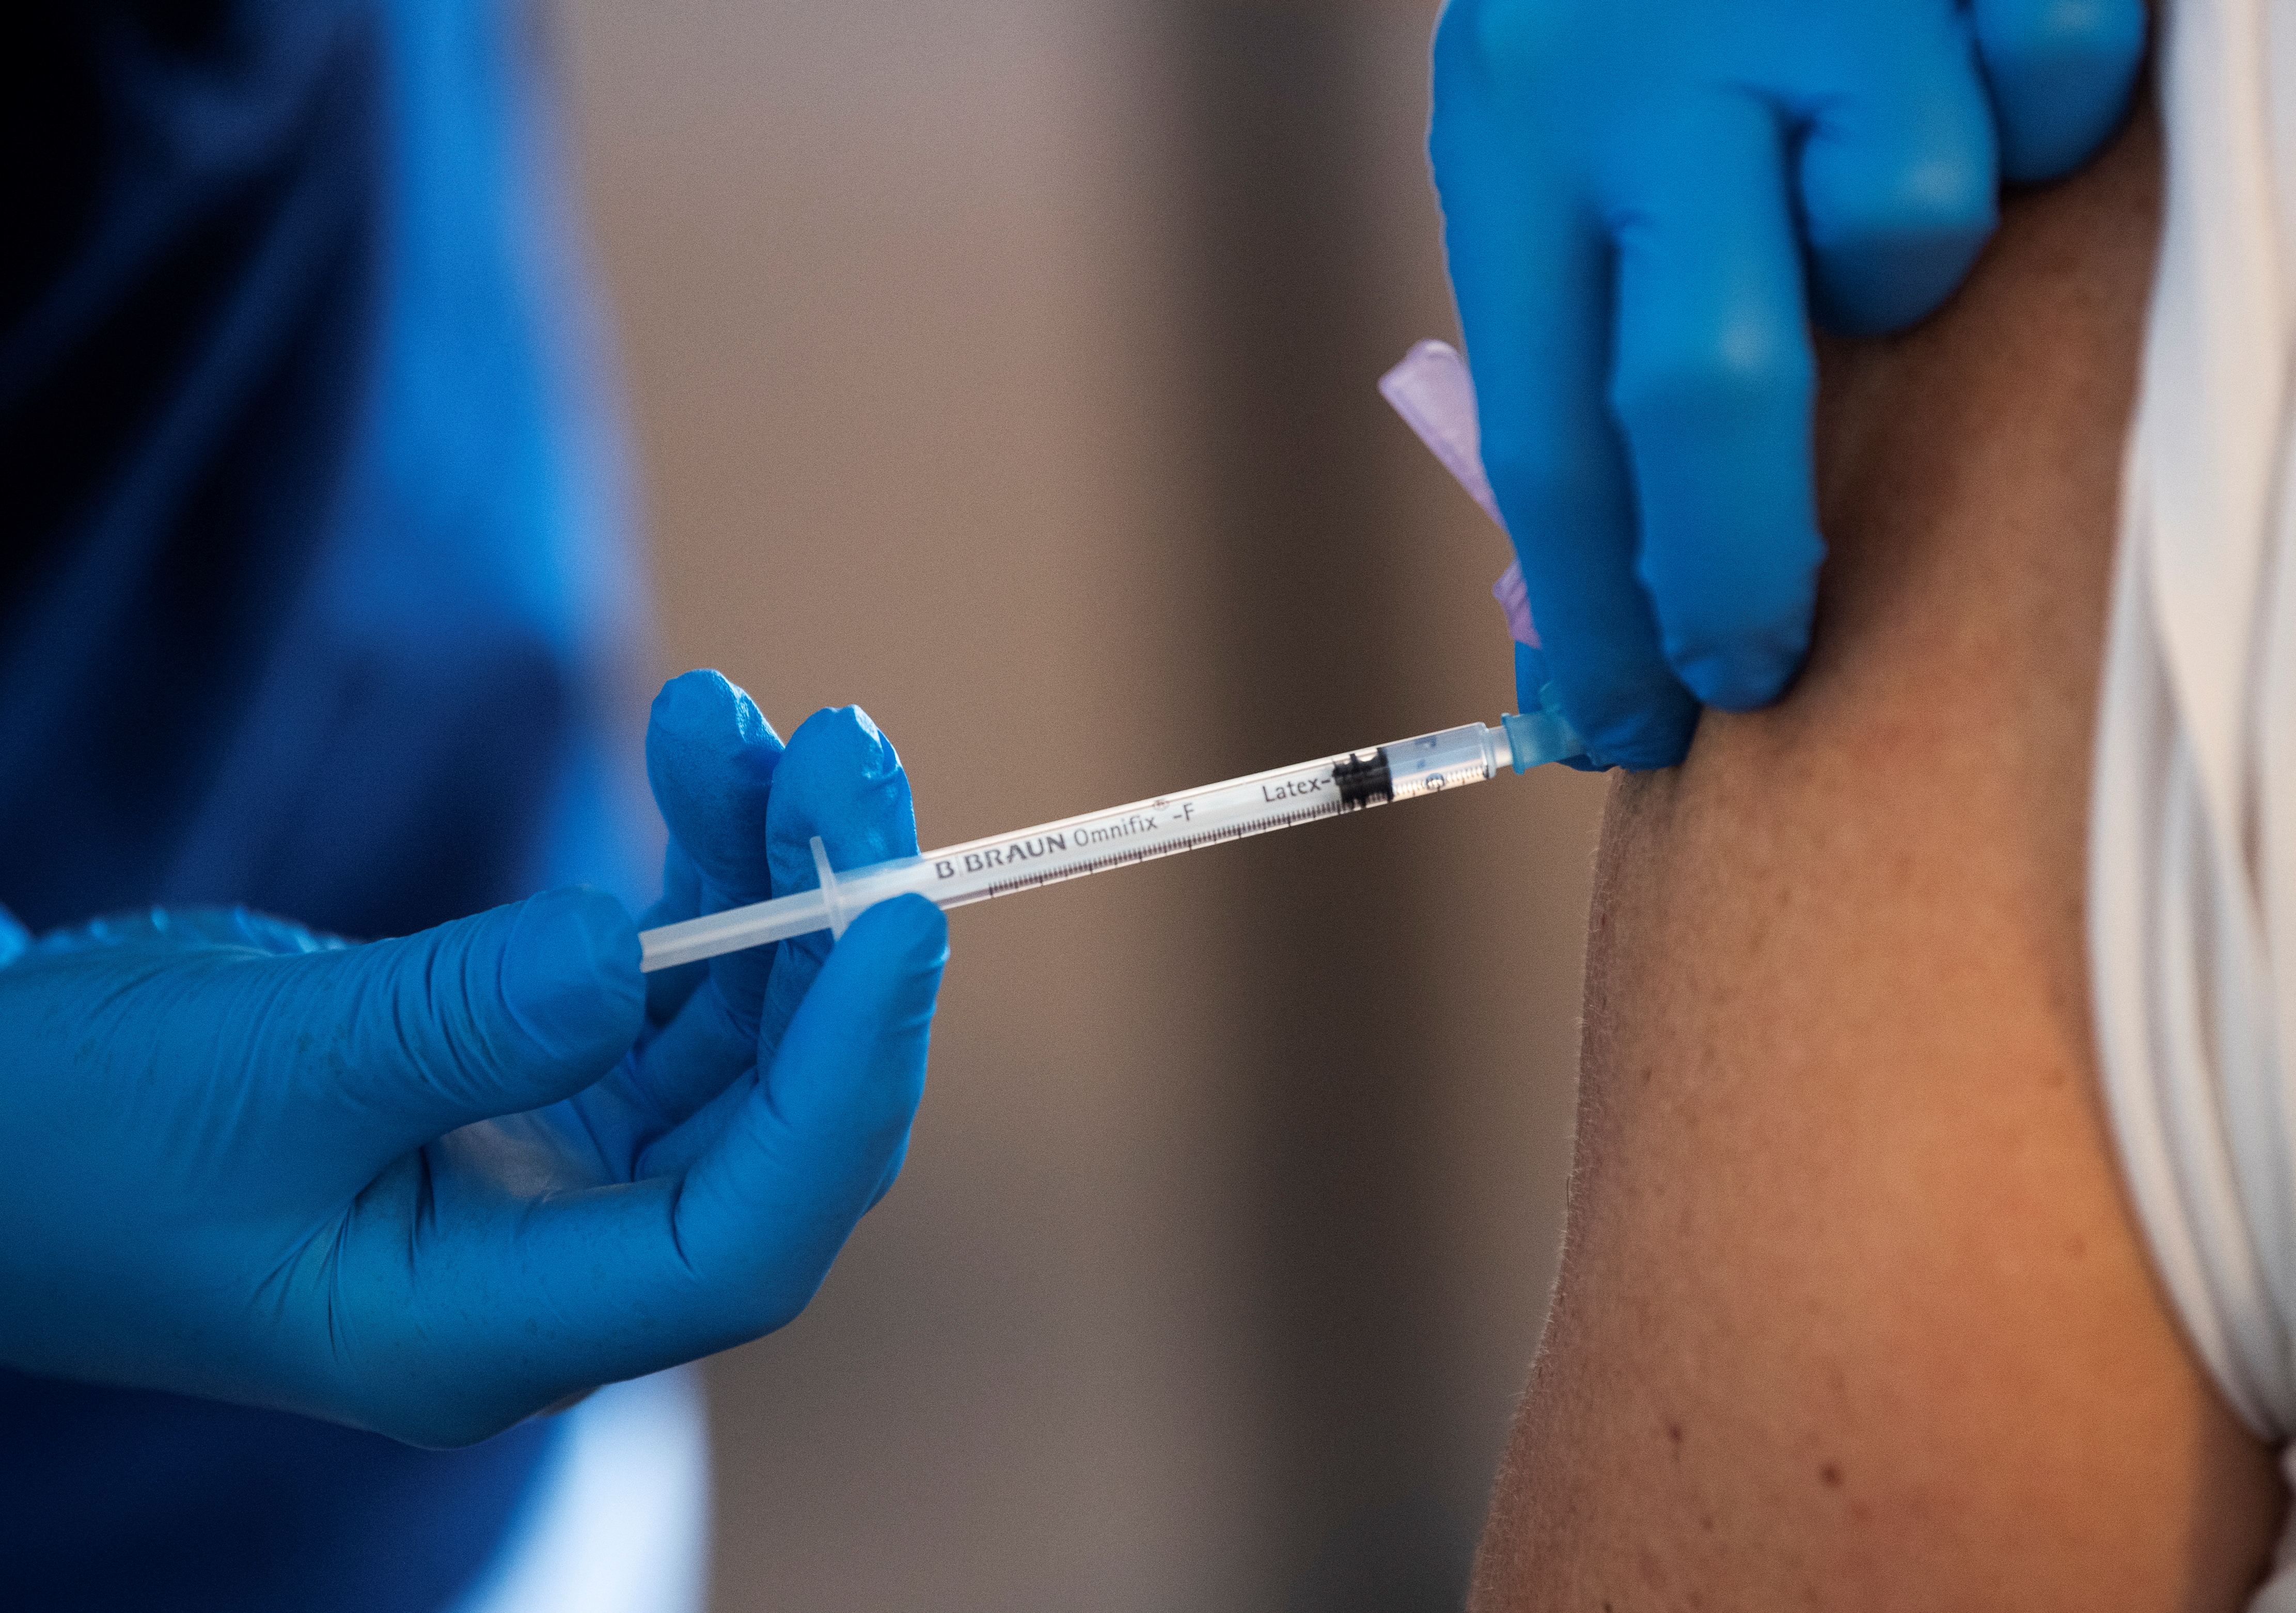 A health worker vaccinates an elderly person with Pfizer's COVID-19 vaccine at a temporary vaccination clinic in a church in Sollentuna, north of Stockholm, Sweden March 2, 2021. Fredrik Sandberg/TT News Agency/via REUTERS